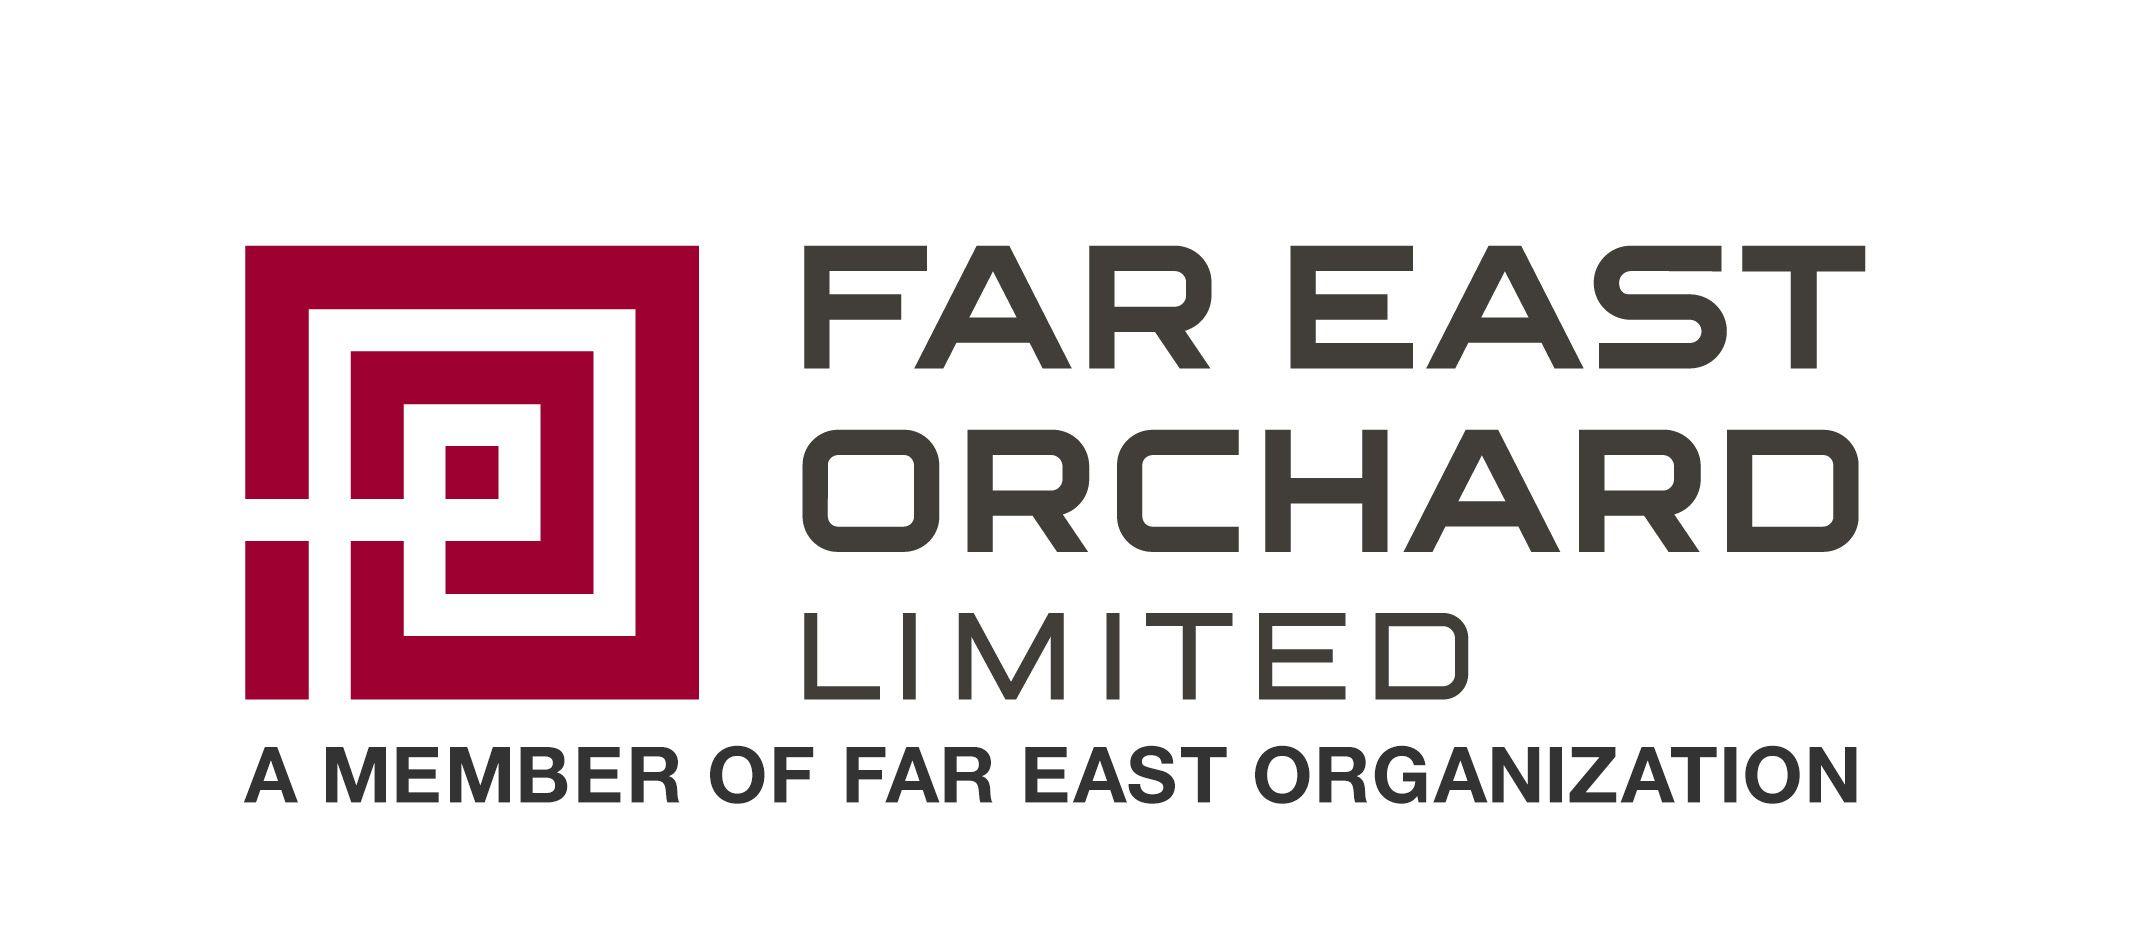 The Limited Logo - Far East Orchard Limited - A Member of Far East Organization | Singapore